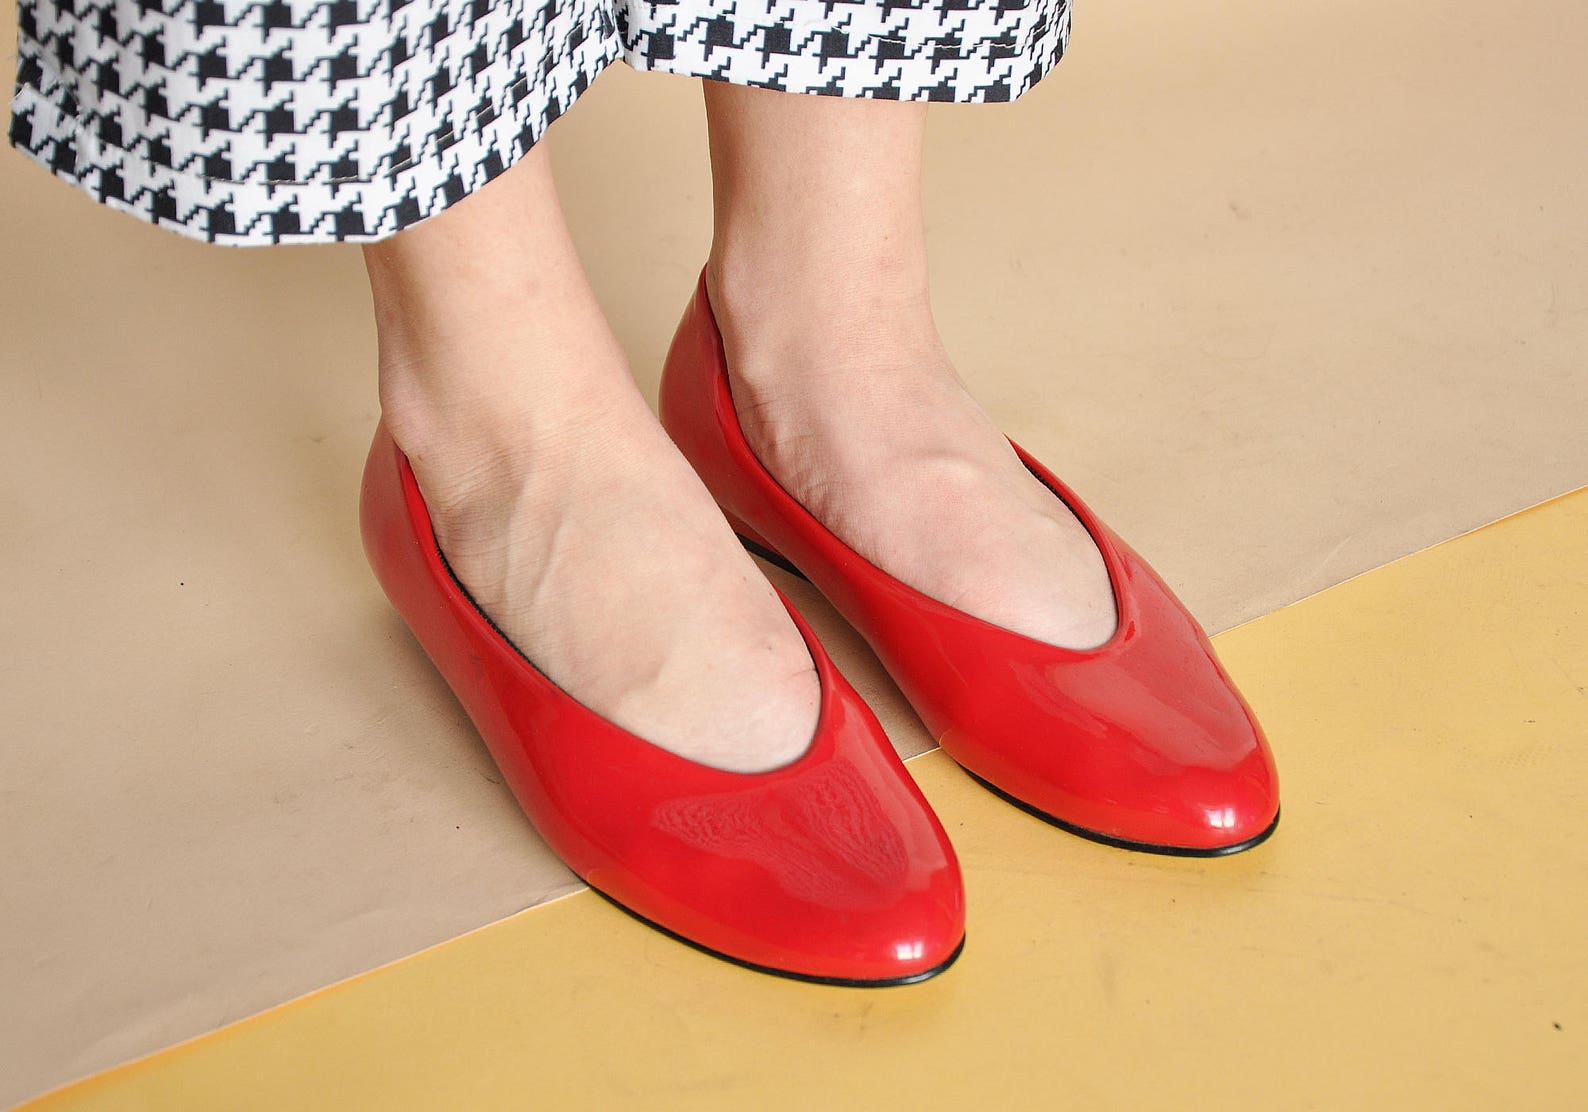 90s mod flats flat shoes red shoes red flats minimal flats minimalist flats funky flats pointy flats red ballet / size 6.5 us /